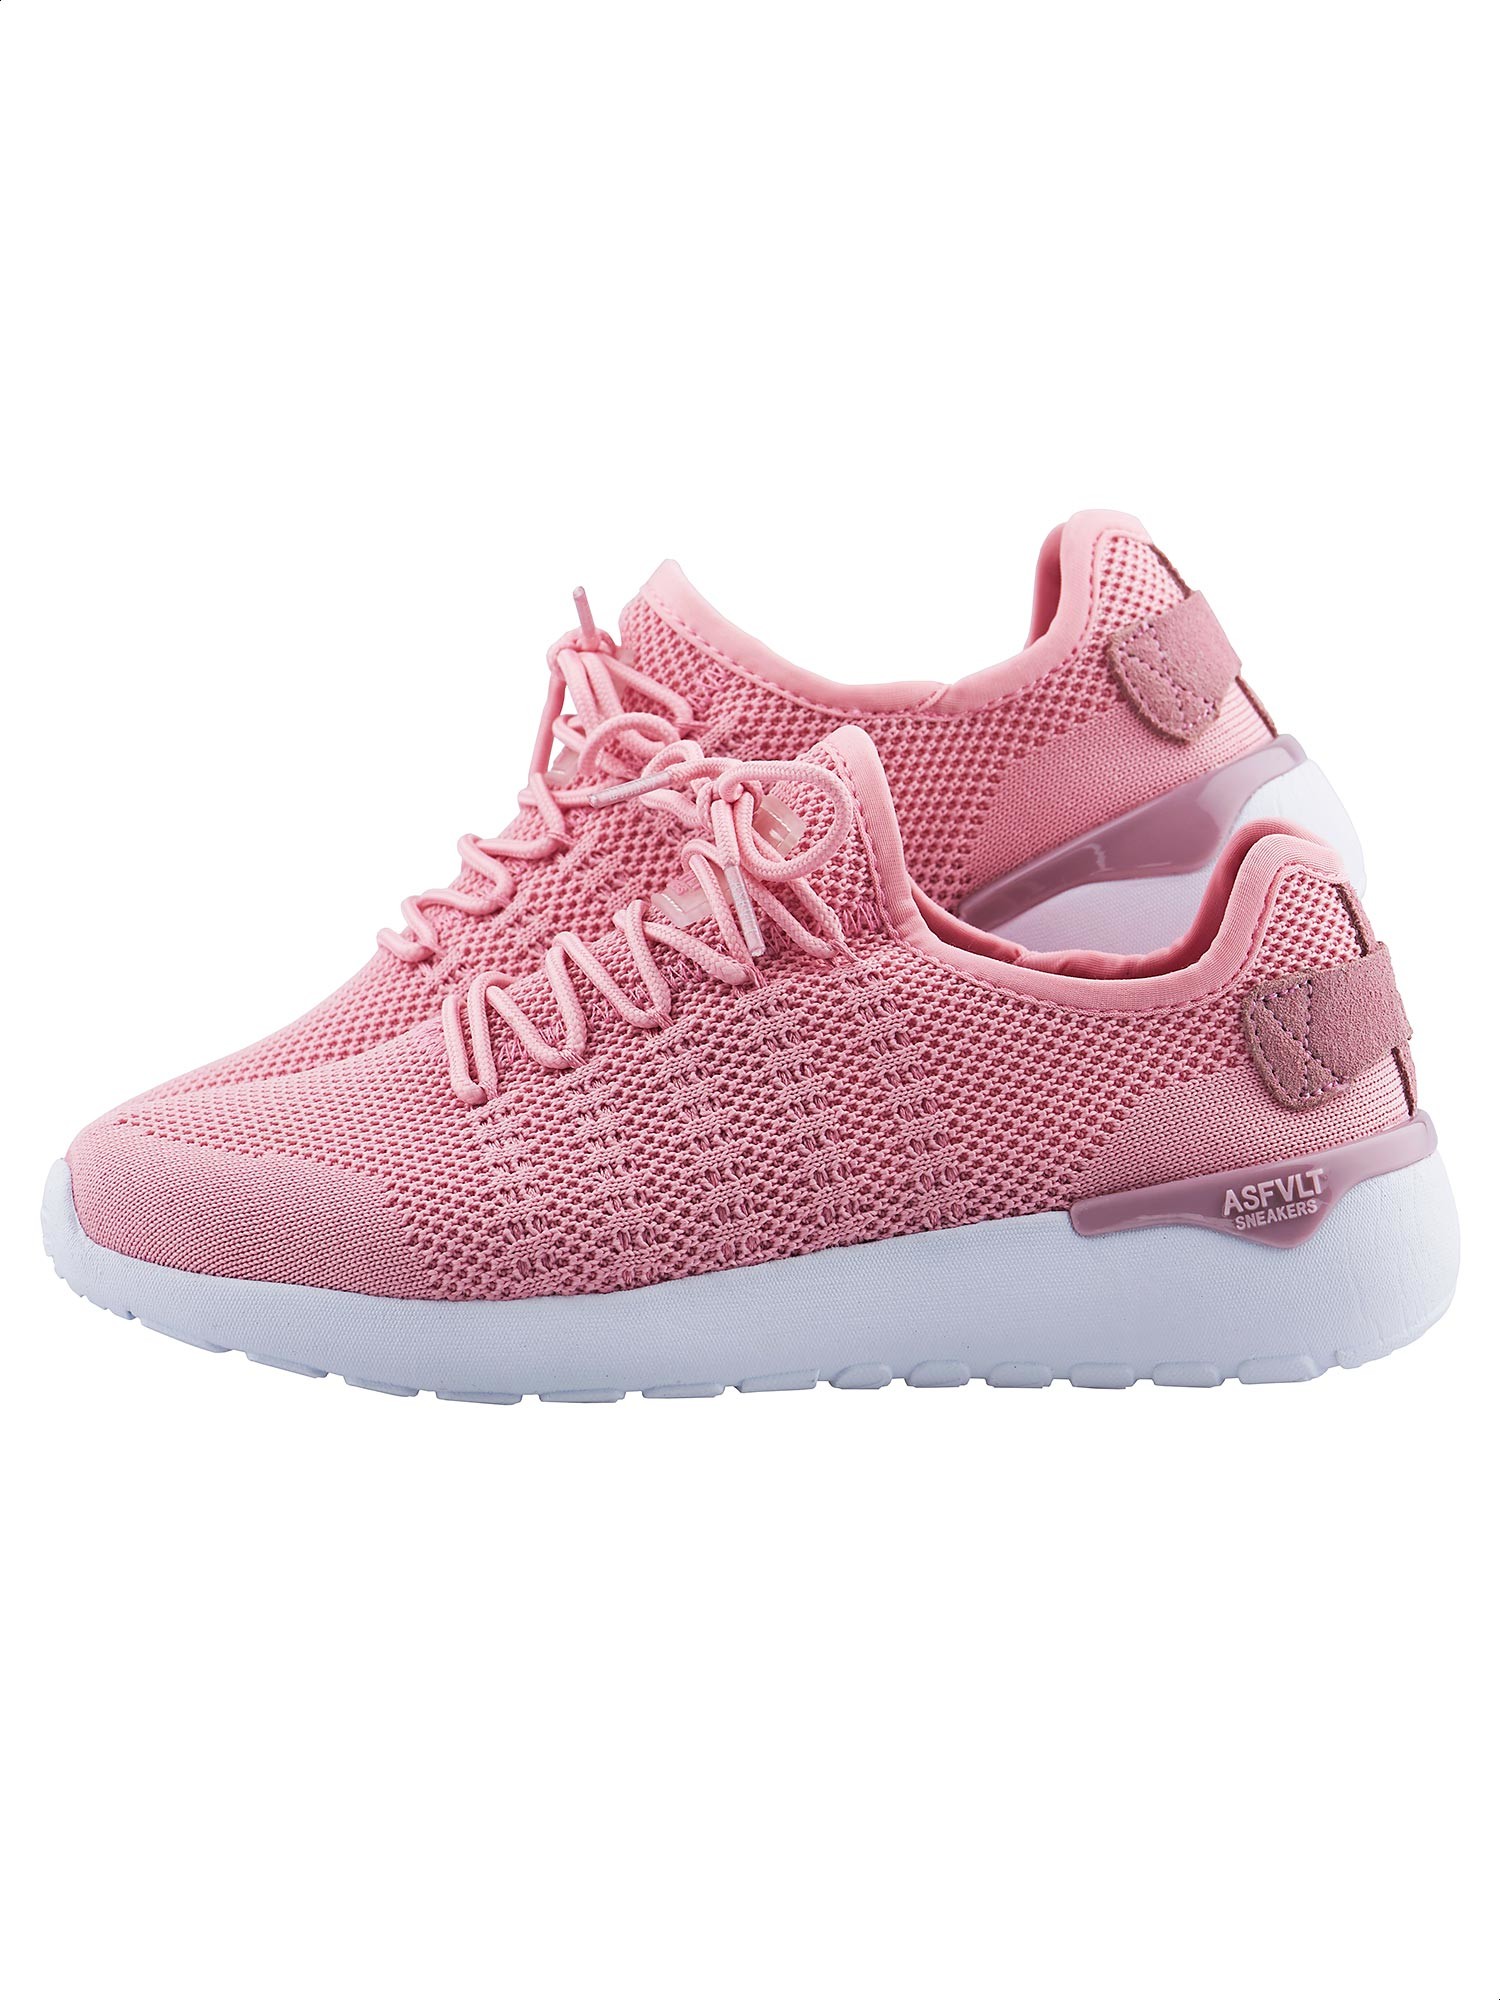 Very light pink sneakers with white sole - ASFVLT